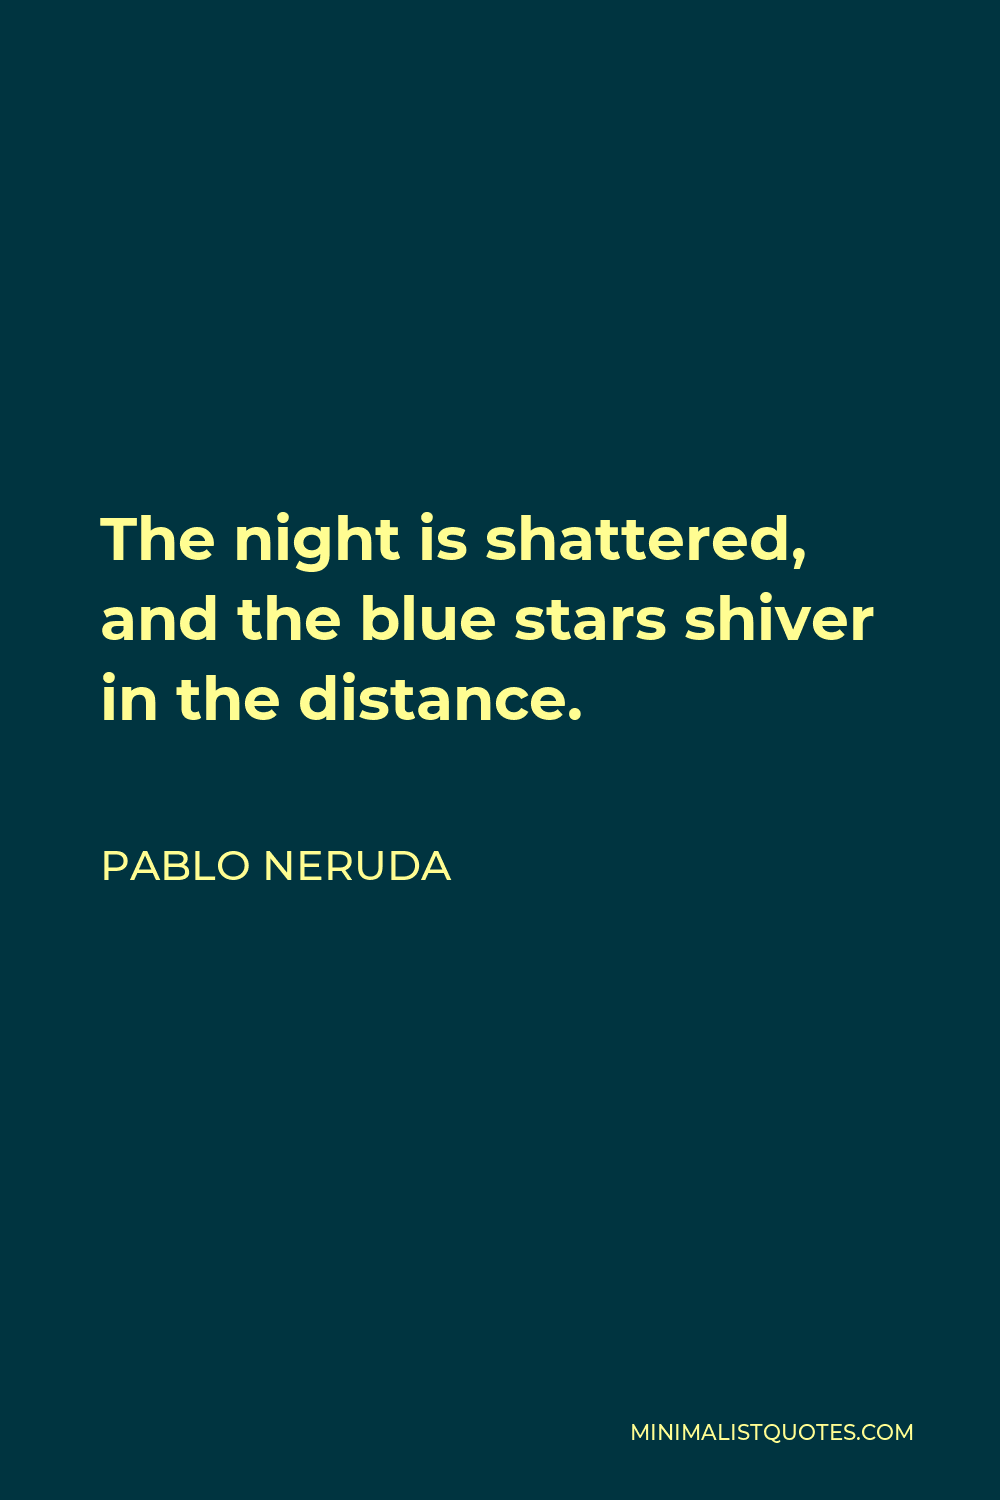 Pablo Neruda Quote - The night is shattered, and the blue stars shiver in the distance.